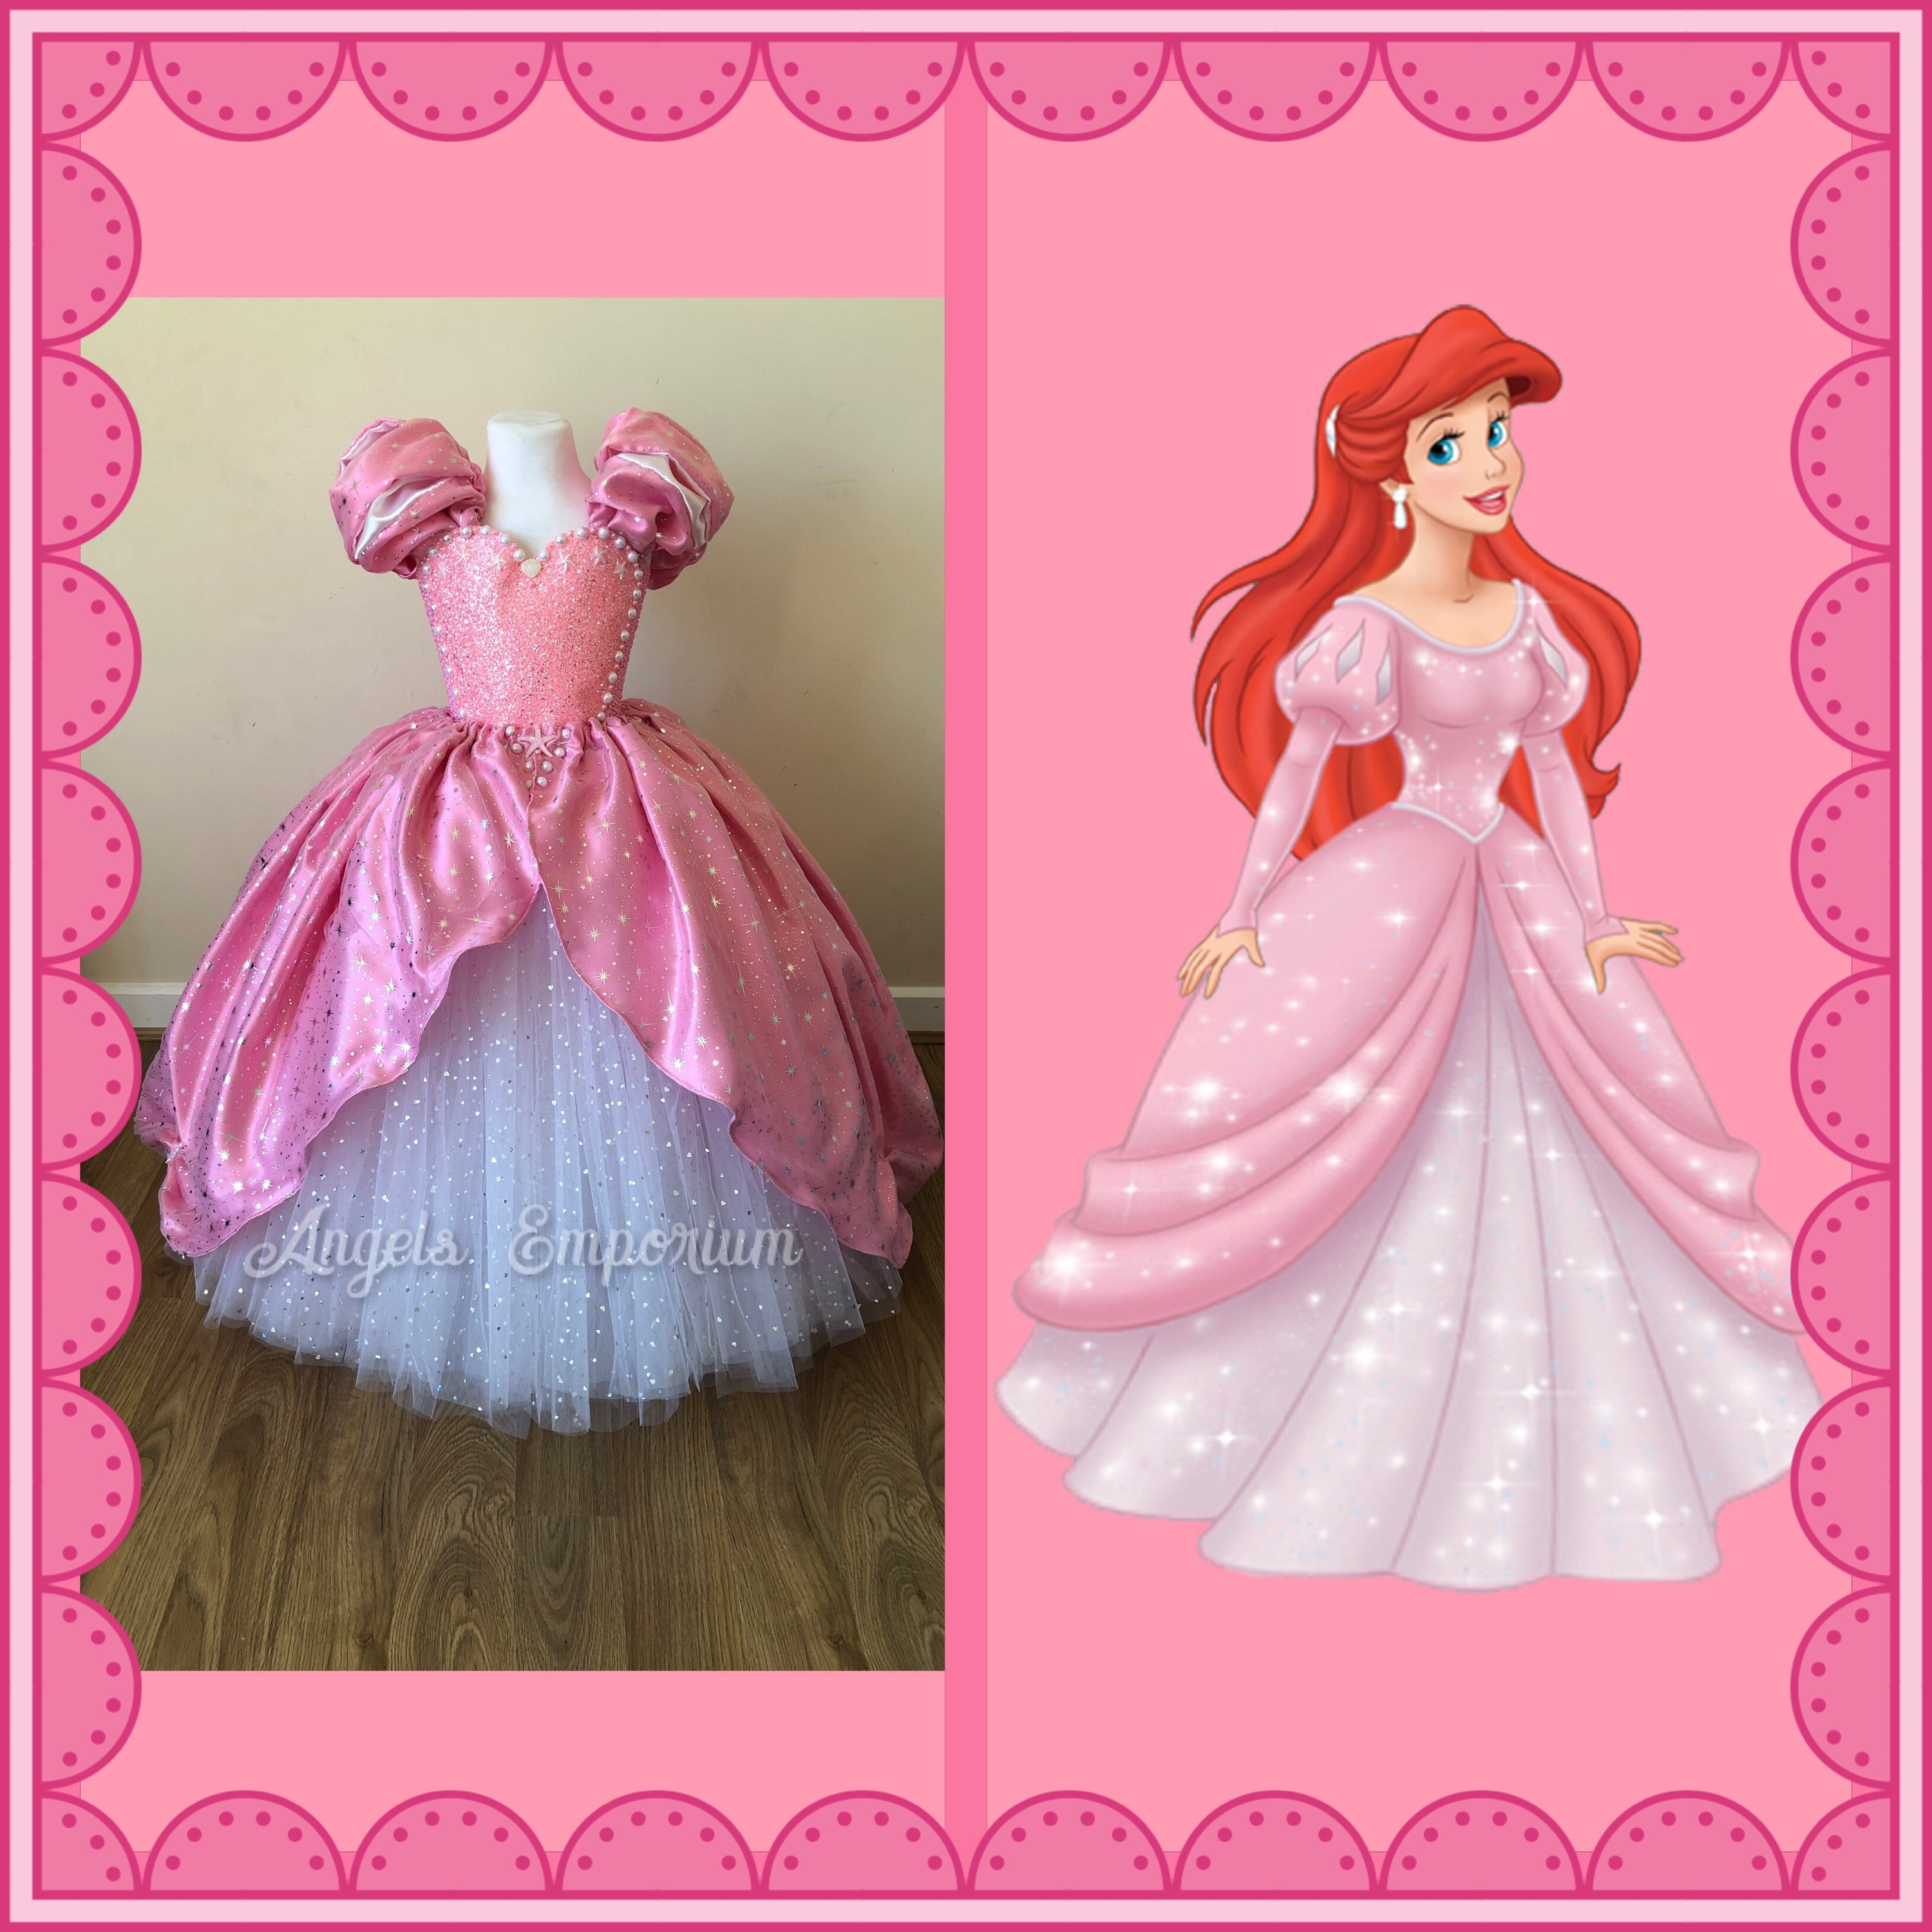 The Little Mermaid Pink Dress by Firefly-Path on DeviantArt